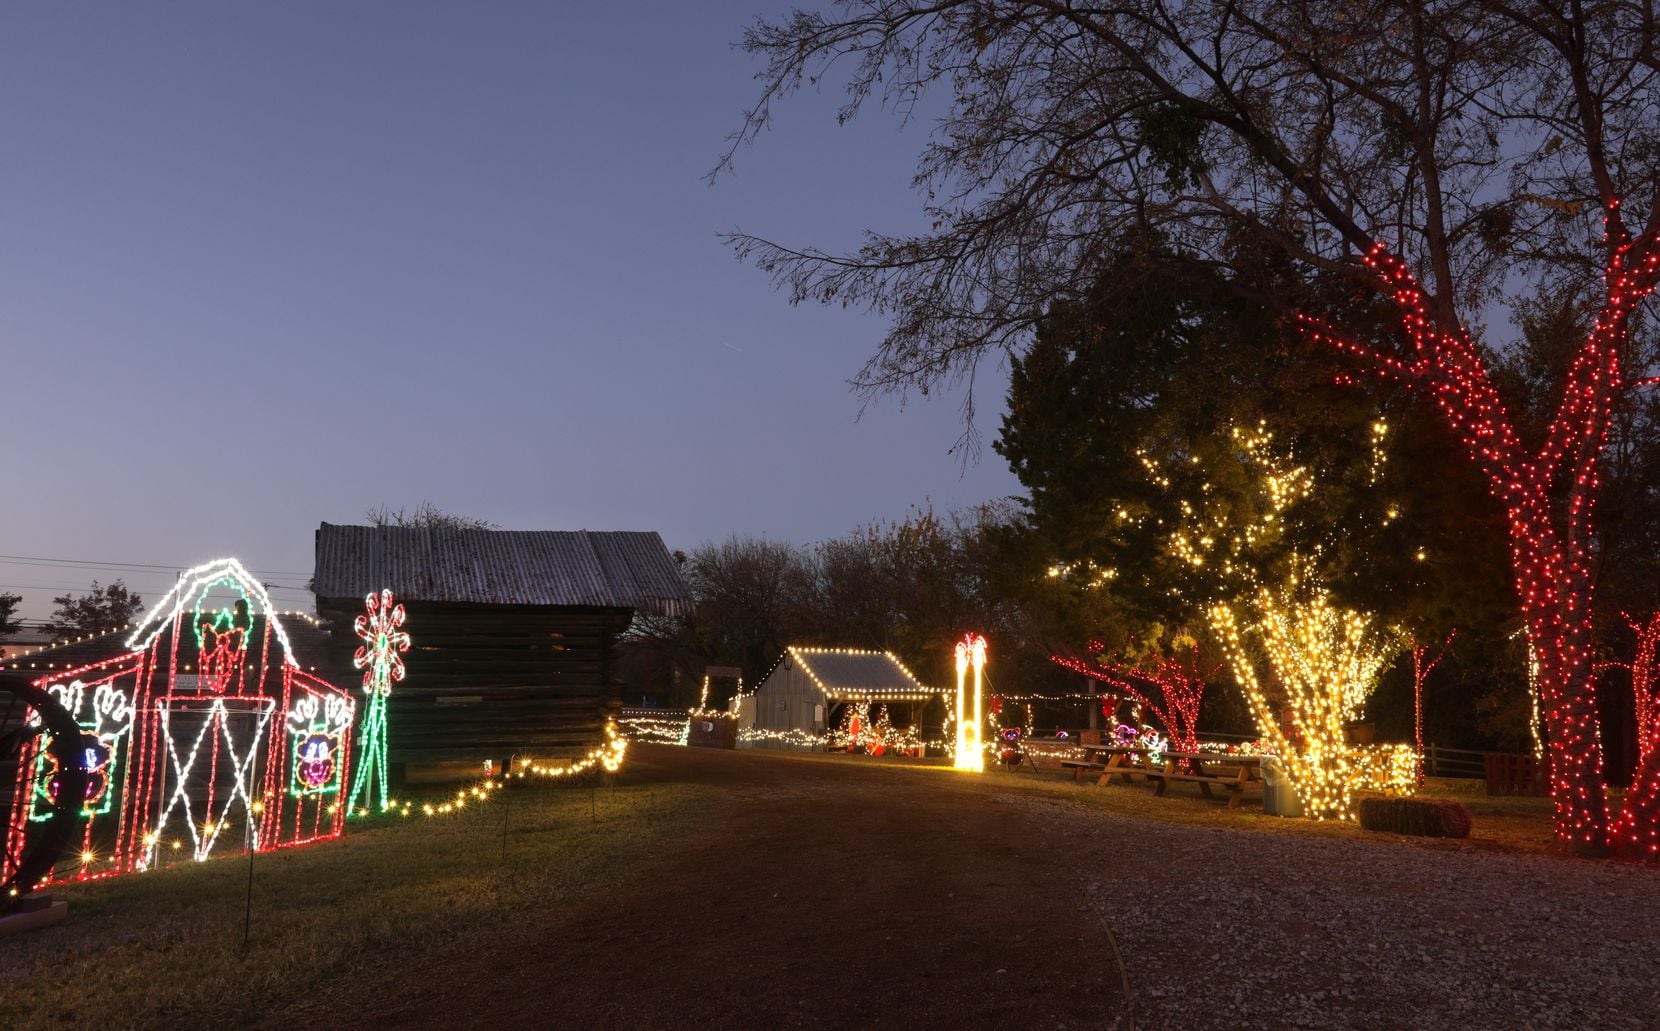 Heritage Farmstead Museum's Lights on the Farm in Plano includes more than a million lights...